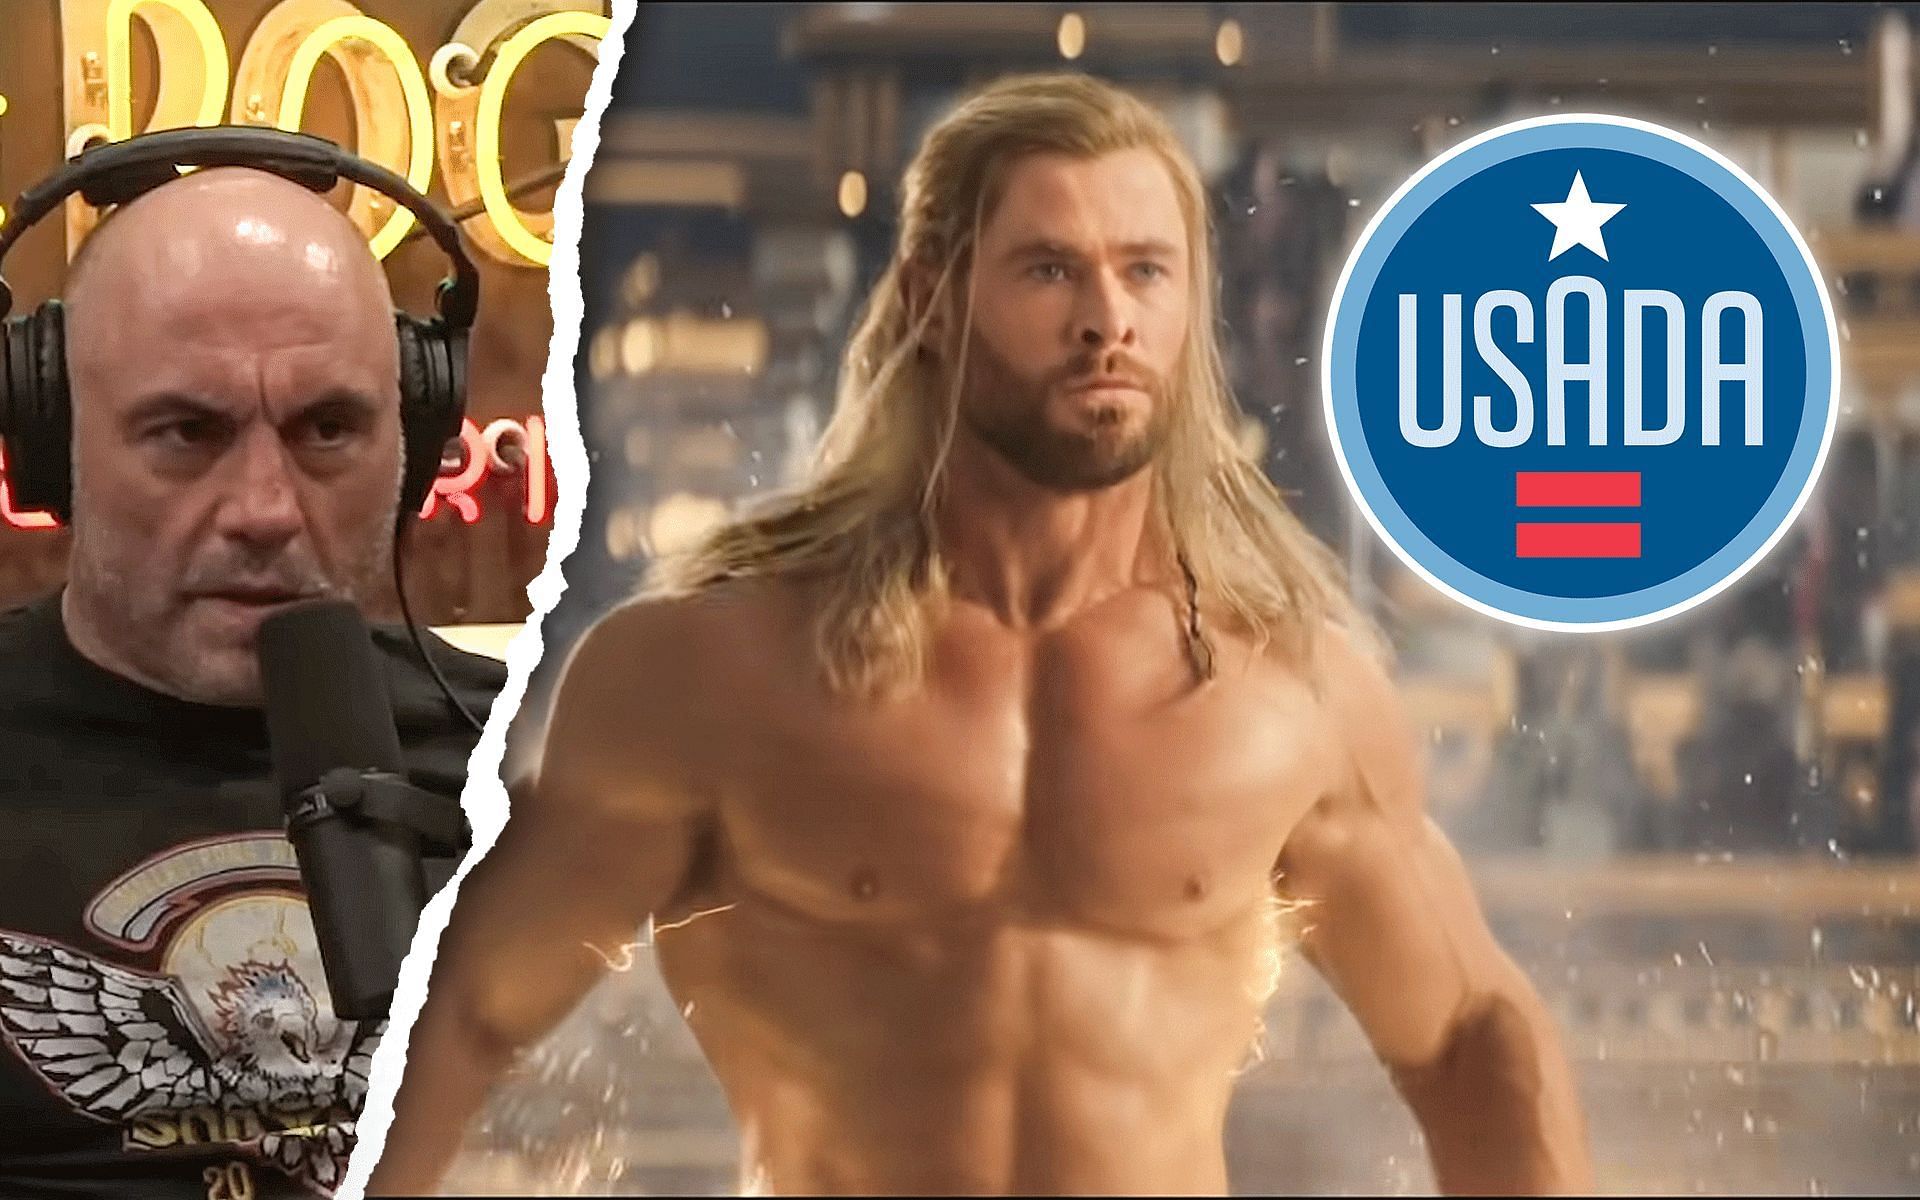 Lot of People Say, 'Oh, He Does Steroids'”: Shocking Backlash Against Chris  Hemsworth for His Godly Physique Put to Rest by Expert - EssentiallySports